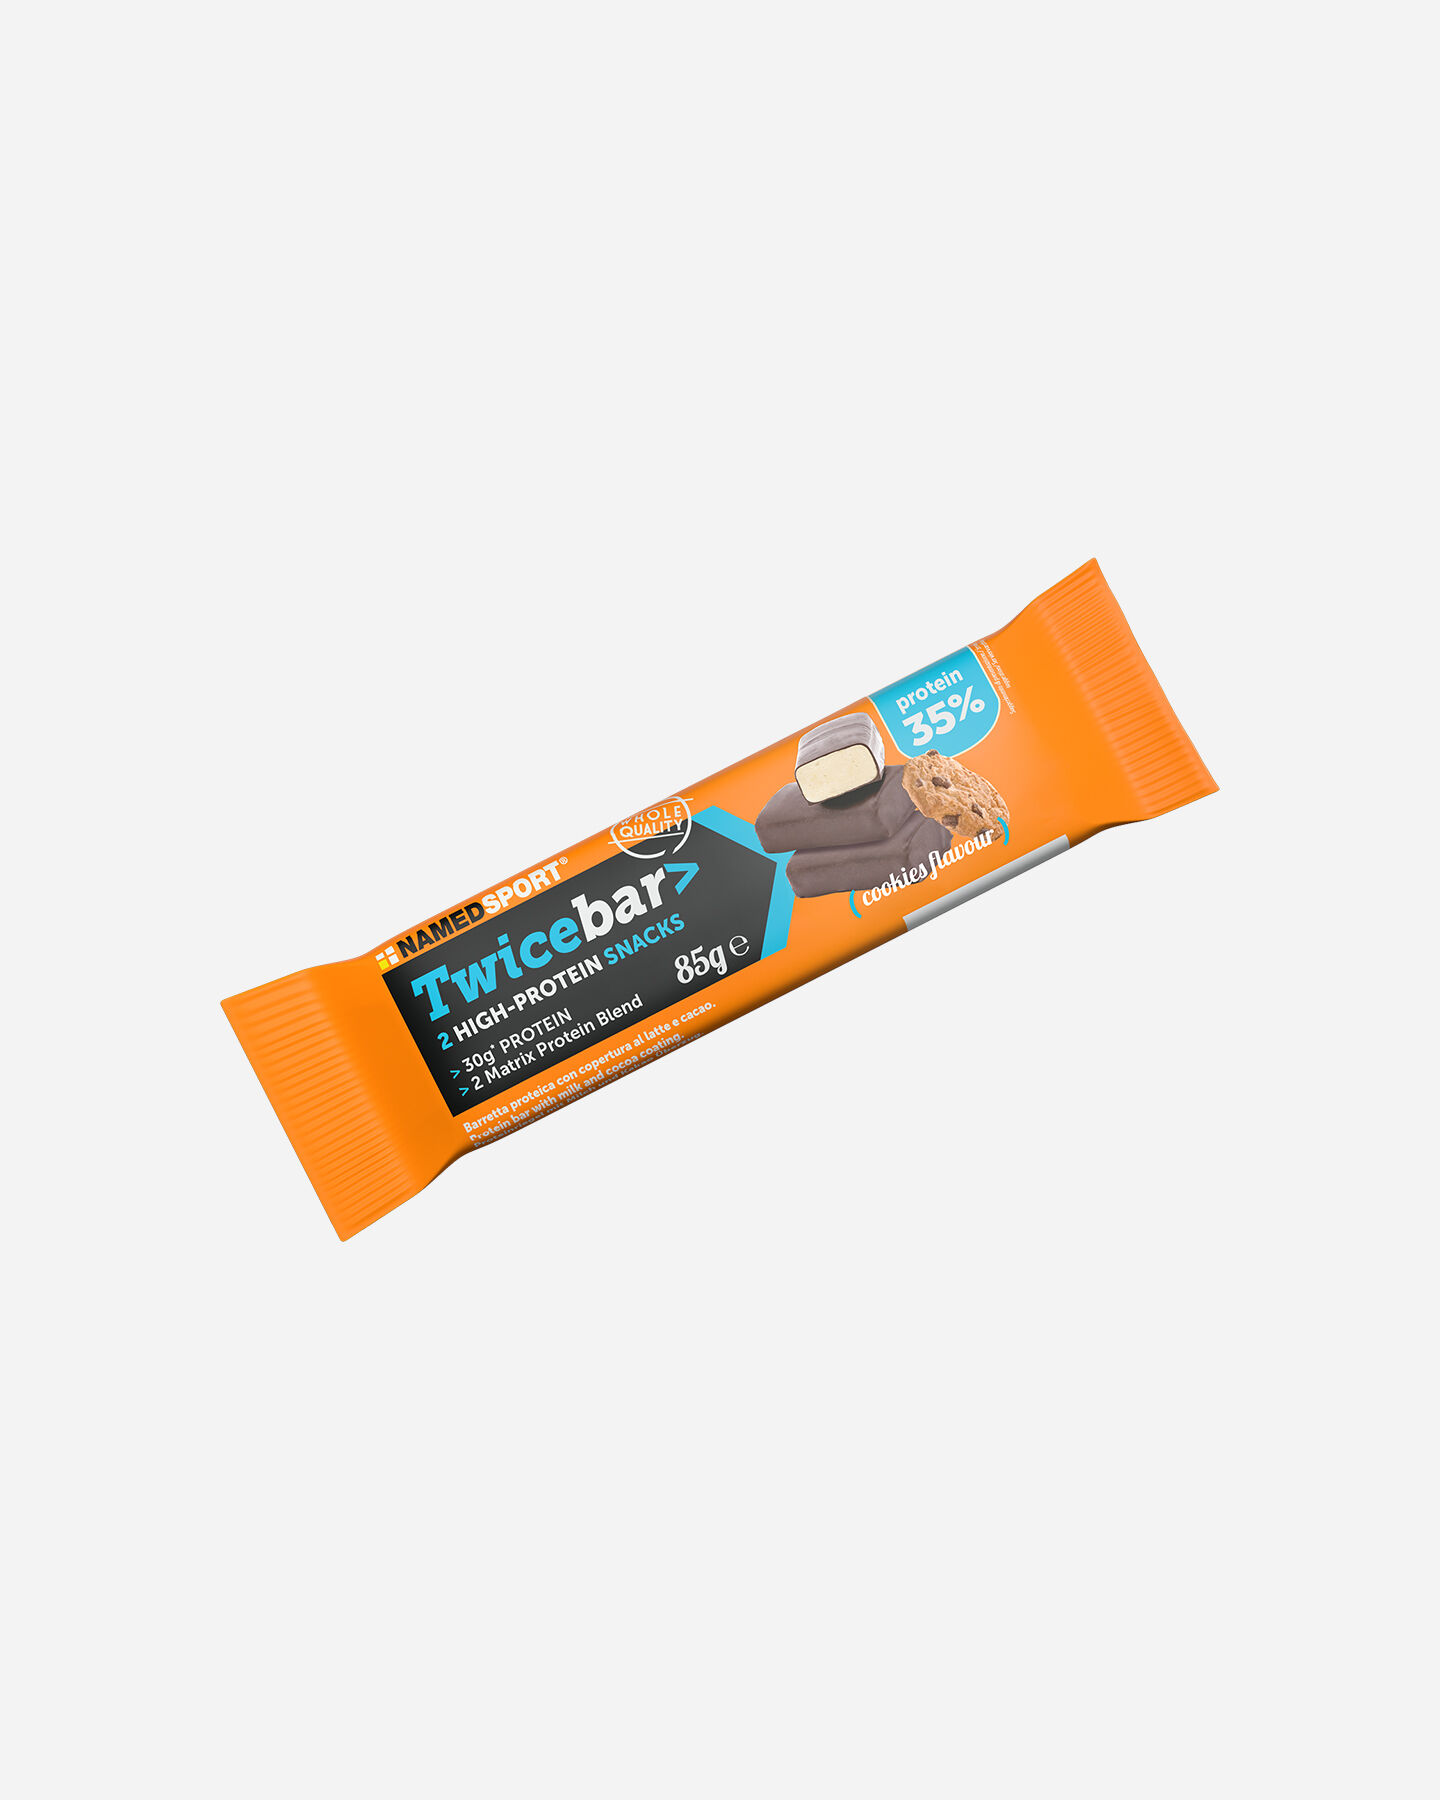  Energetico NAMED SPORT TWICEBAR COOKIES FLAVOUR 85G  S4127595|1|UNI scatto 0